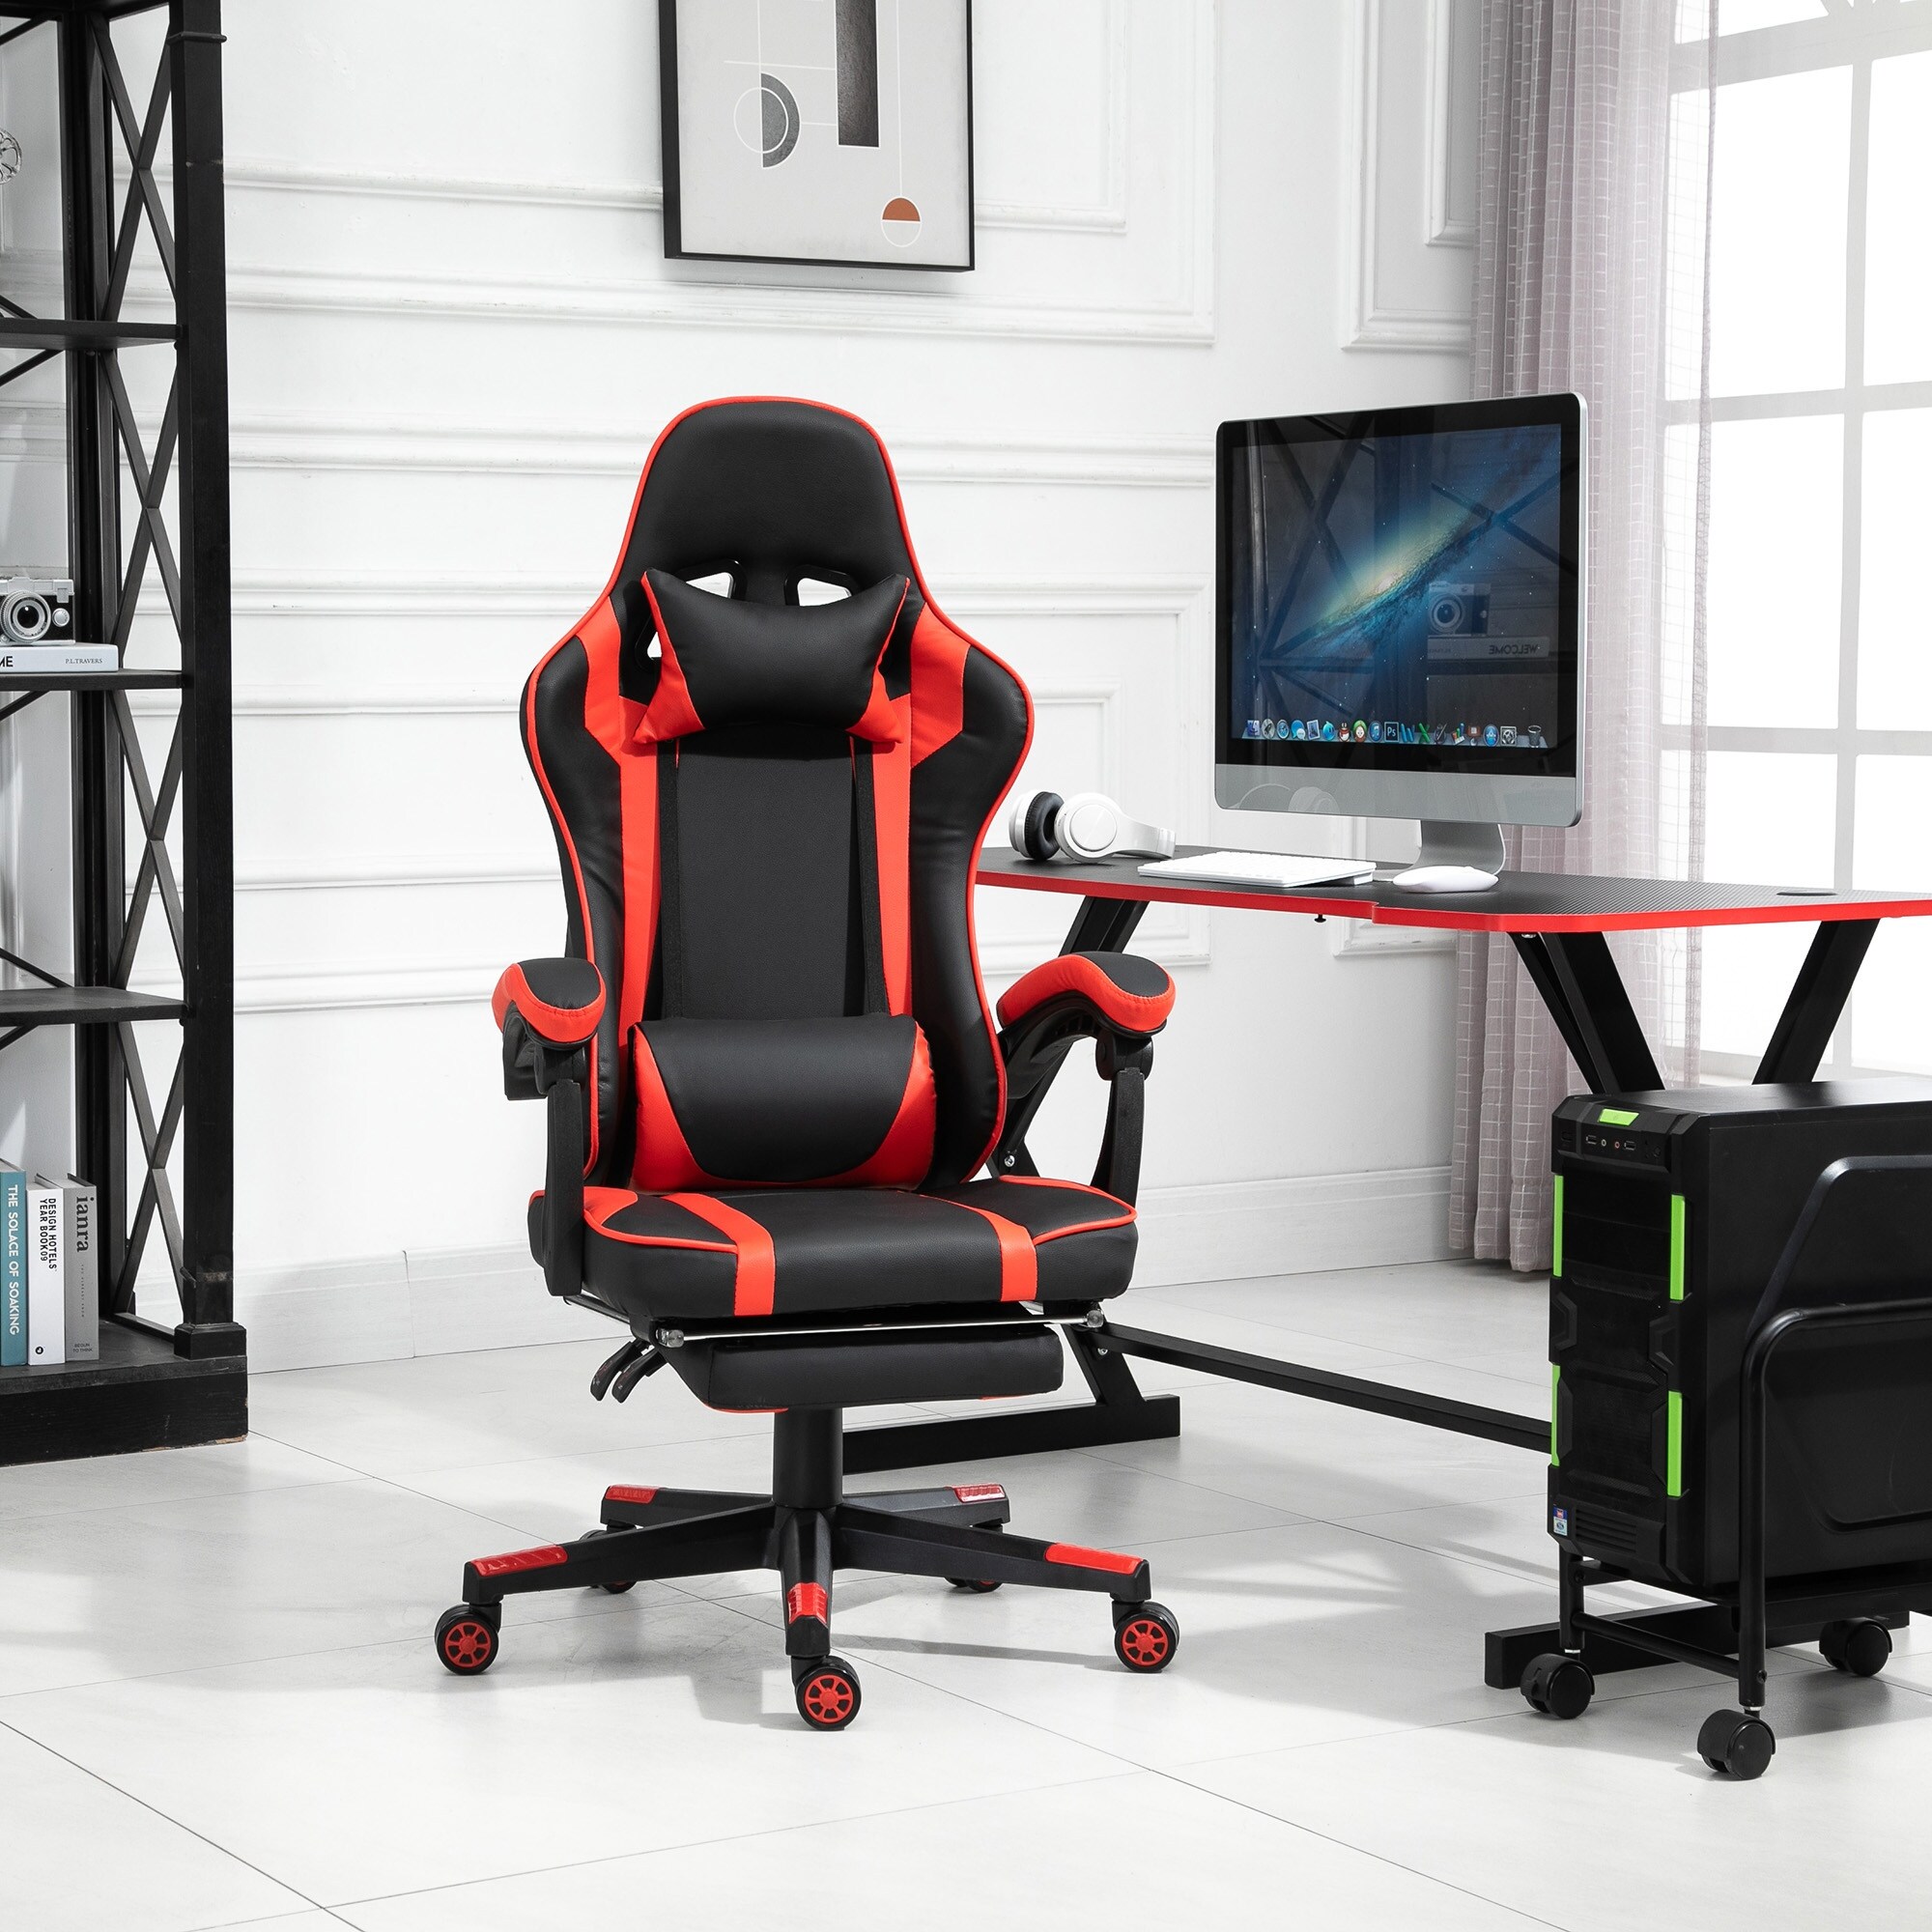 https://ak1.ostkcdn.com/images/products/is/images/direct/5a62f6f1ff9202ee064d19c128b77ae607c359e9/Vinsetto-Office-Gaming-Chair-Leather-Covered-Racing-Style-Reclining-Back%26Adjustable-Height-w--Lumbar-Support%26Extensible-Footrest.jpg